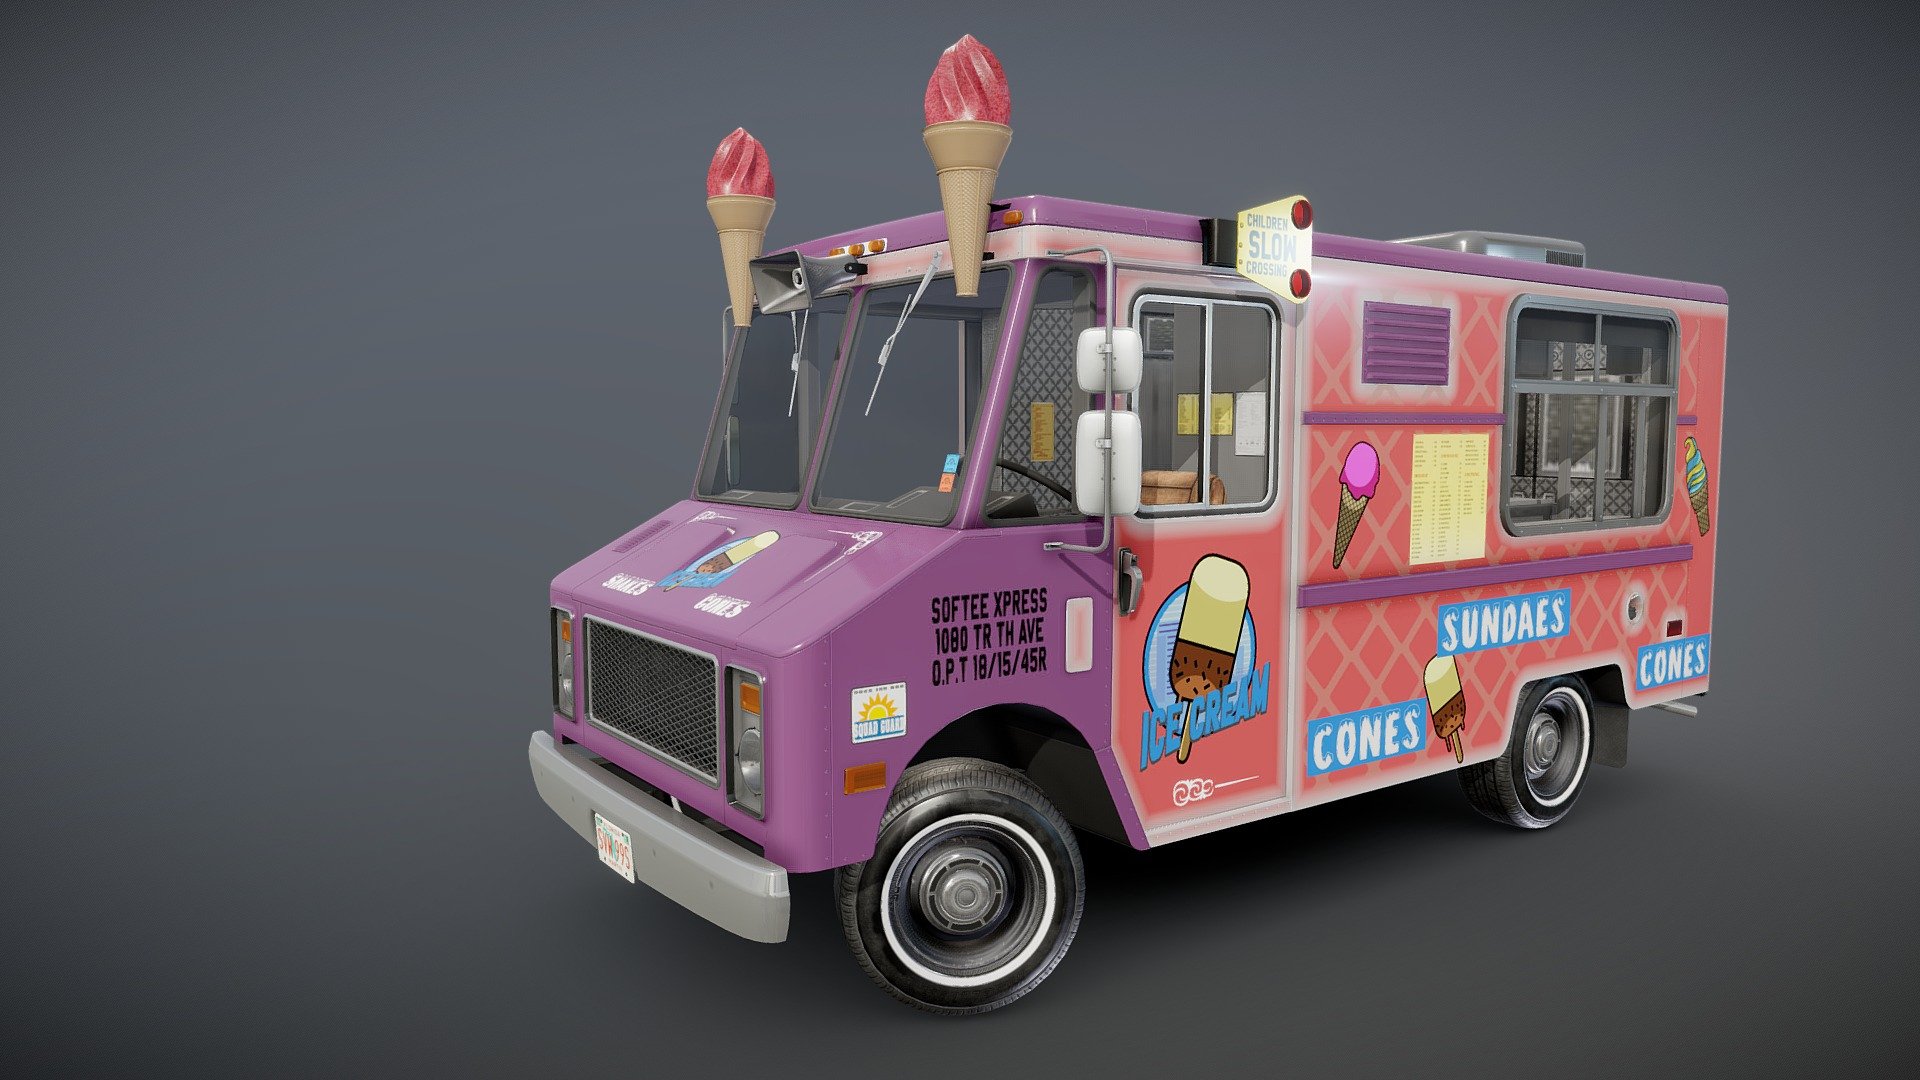 Icecream truck game ready model.

Full textured model with clean topology.

High accuracy exterior model.

High detailed cabin - seams, rivets, chrome parts, wipers, mud flaps and etc.

Side doors are openable.

Lowpoly interior - 2818 tris 1824 verts

Wheels - 9012 tris 4968 verts

Full model - 49895 tris 29491 verts.

High detailed rims and tires, with PBR maps(Base_Color/Metallic/Normal/Roughness.png2048x2048 )

Original scale.

Original scale. Lenght 4.86m , width 1.86m , height 2.65m.

Model ready for real-time apps, games, virtual reality and augmented reality.

Asset looks accuracy and realistic and will be a good part of your project 3d model